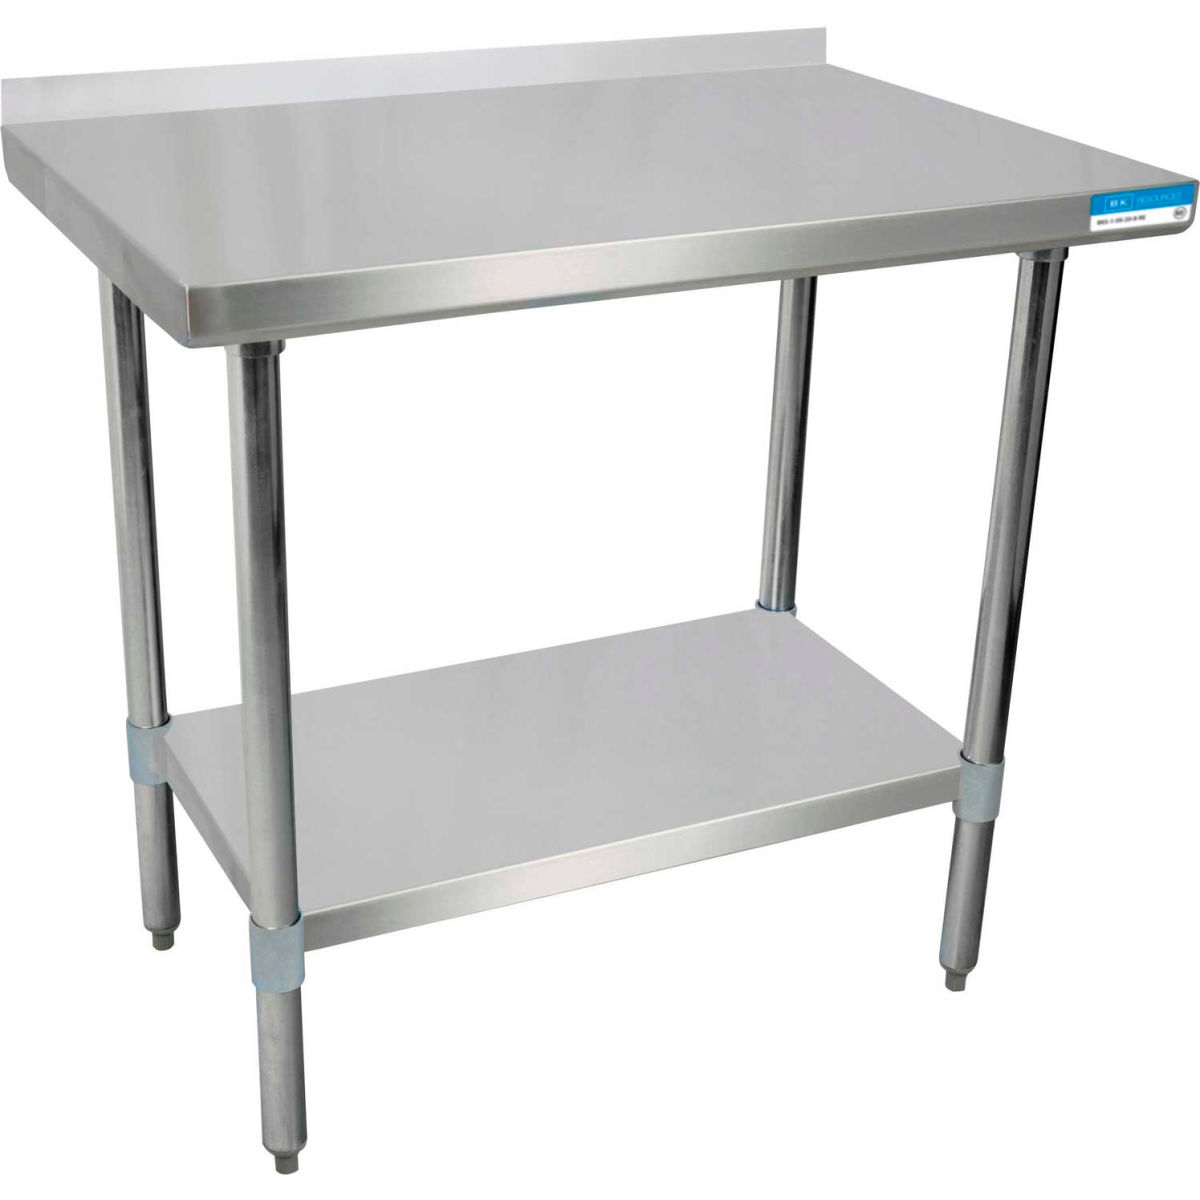 Picture of BK Resources B0899438 18 Gauge 430 Series Stainless Workbench with Undershelf & 1.5 in. Backsplash - 72 x 24 in.